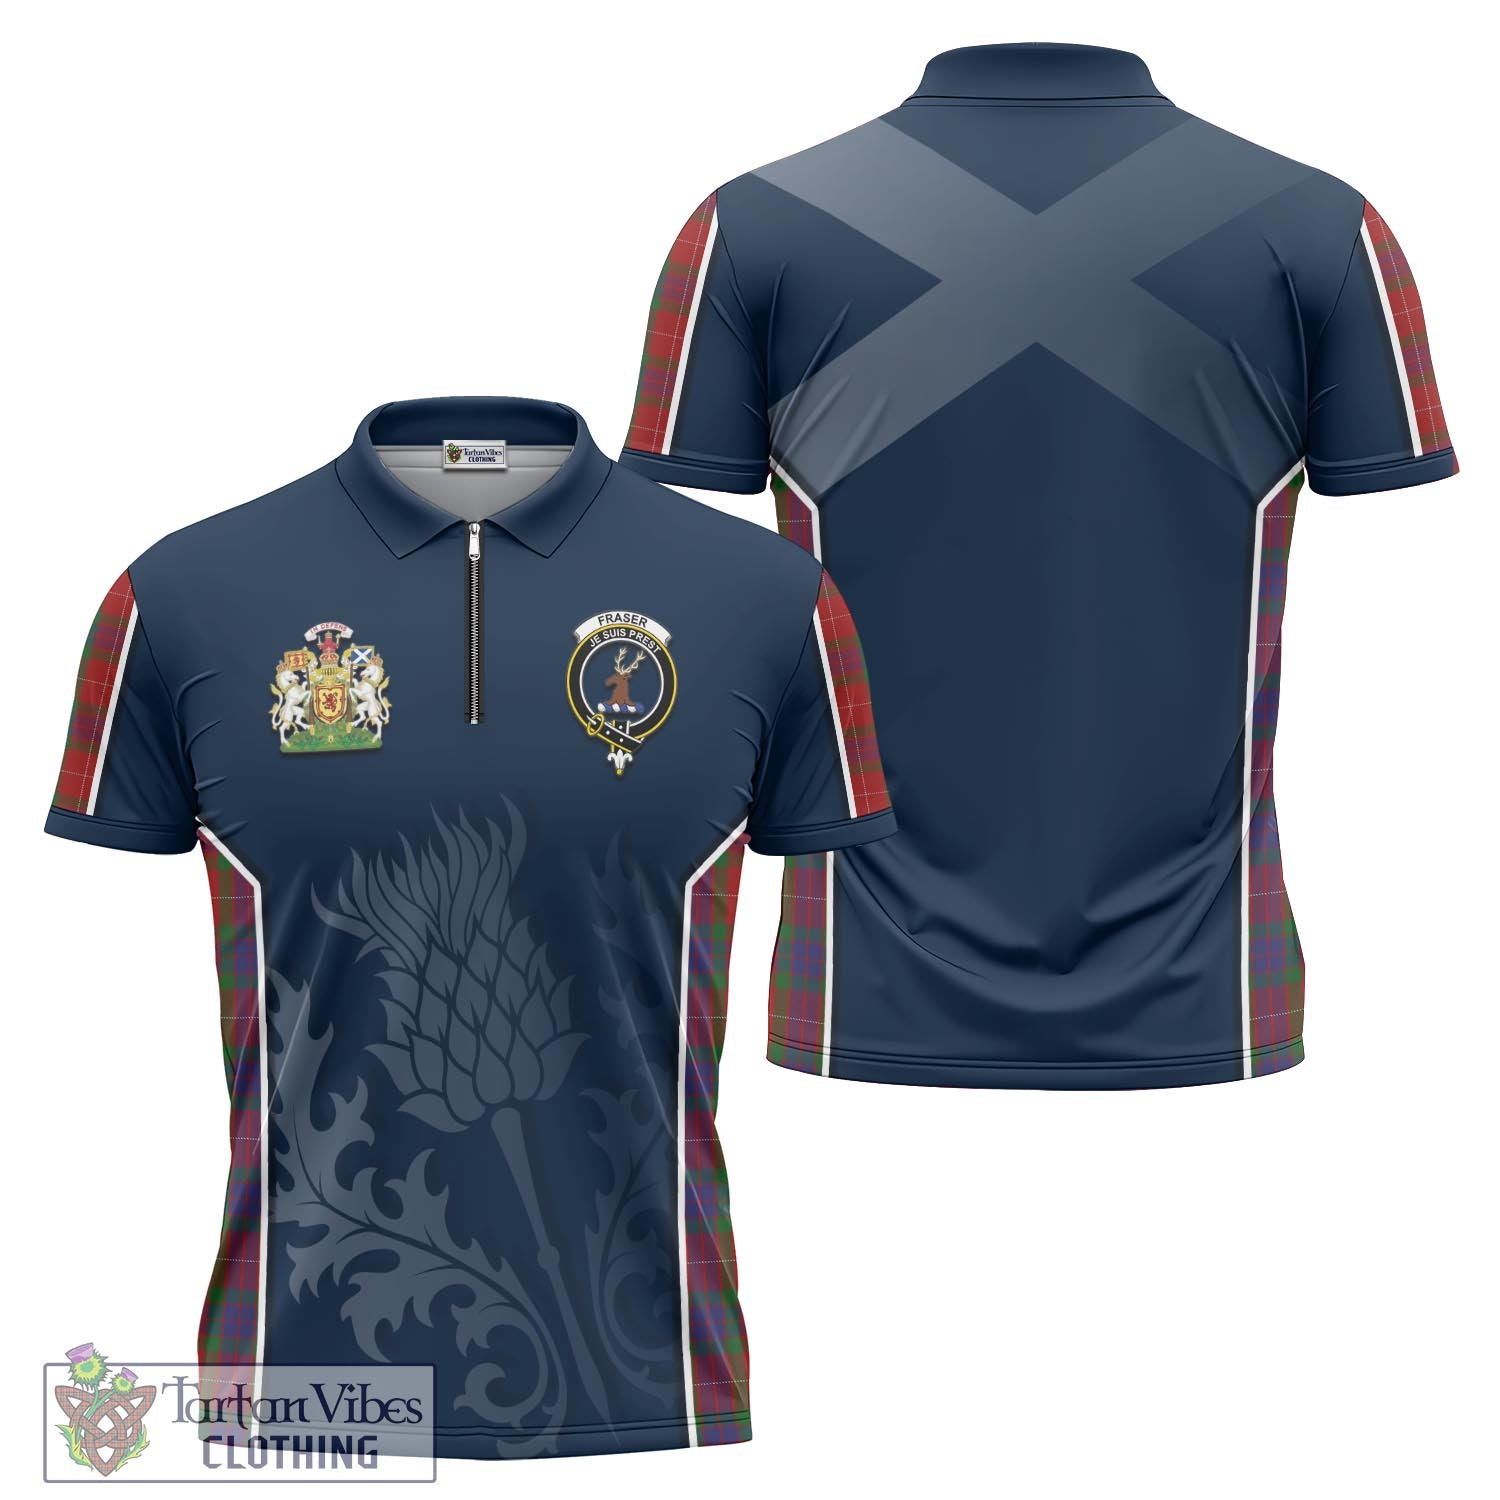 Tartan Vibes Clothing Fraser Tartan Zipper Polo Shirt with Family Crest and Scottish Thistle Vibes Sport Style